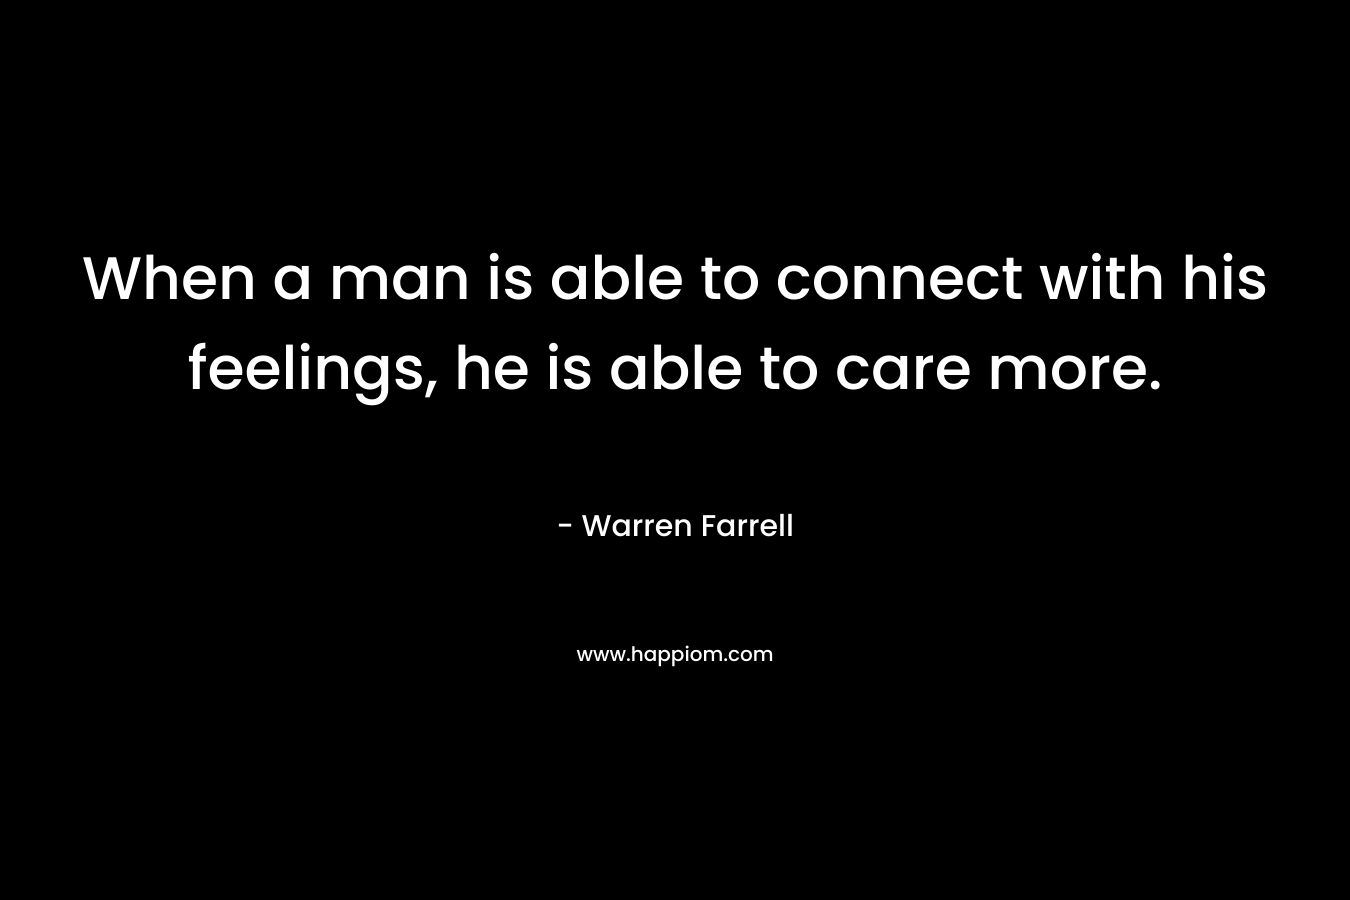 When a man is able to connect with his feelings, he is able to care more.